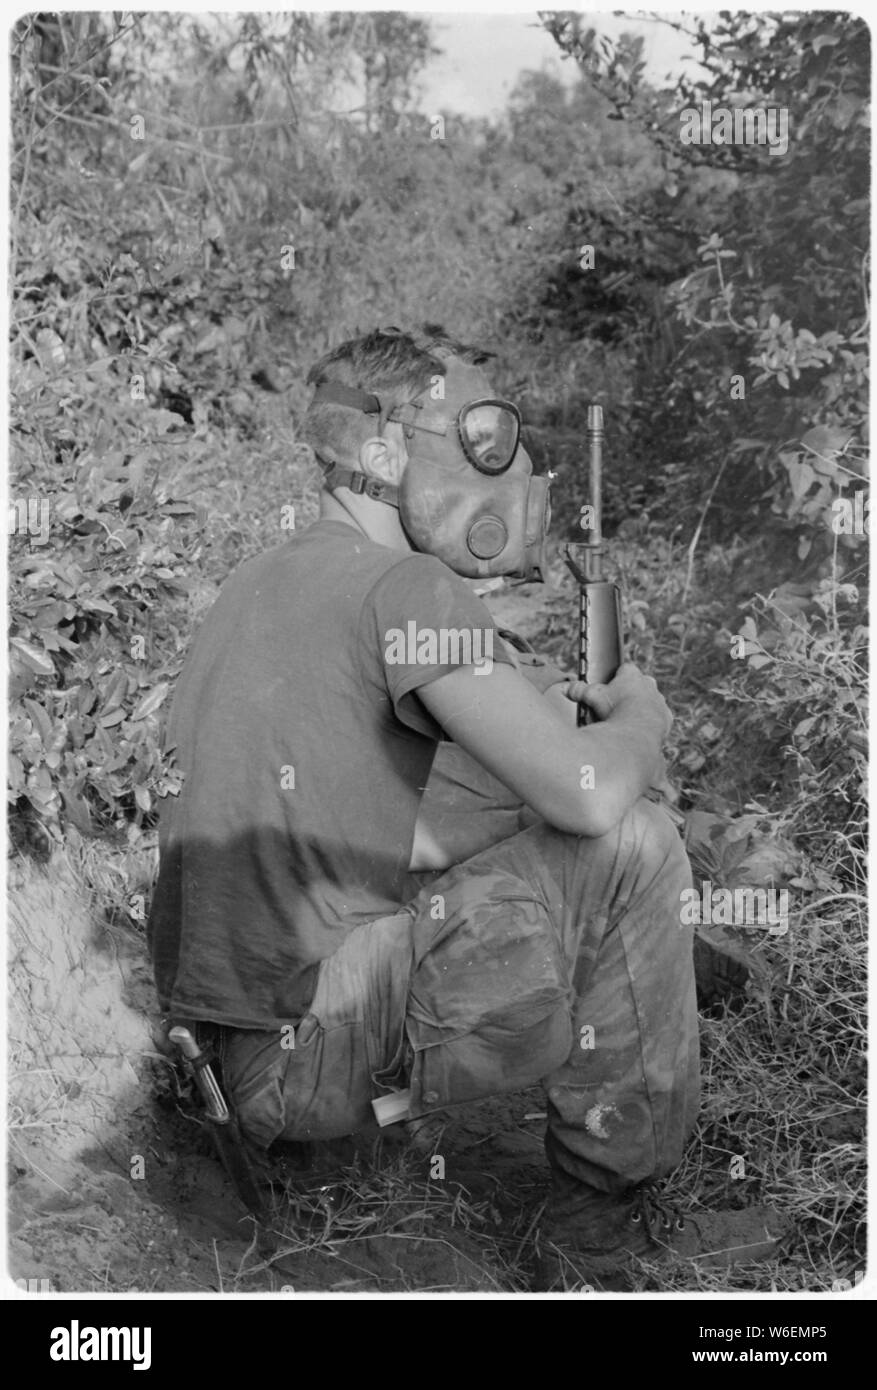 A Marine with the 3nd Battalion, 7th Regiment sits patiently with his gas mask on as he waits to enter a VC tunnel 22 miles south of DaNang, Vietnam. Stock Photo